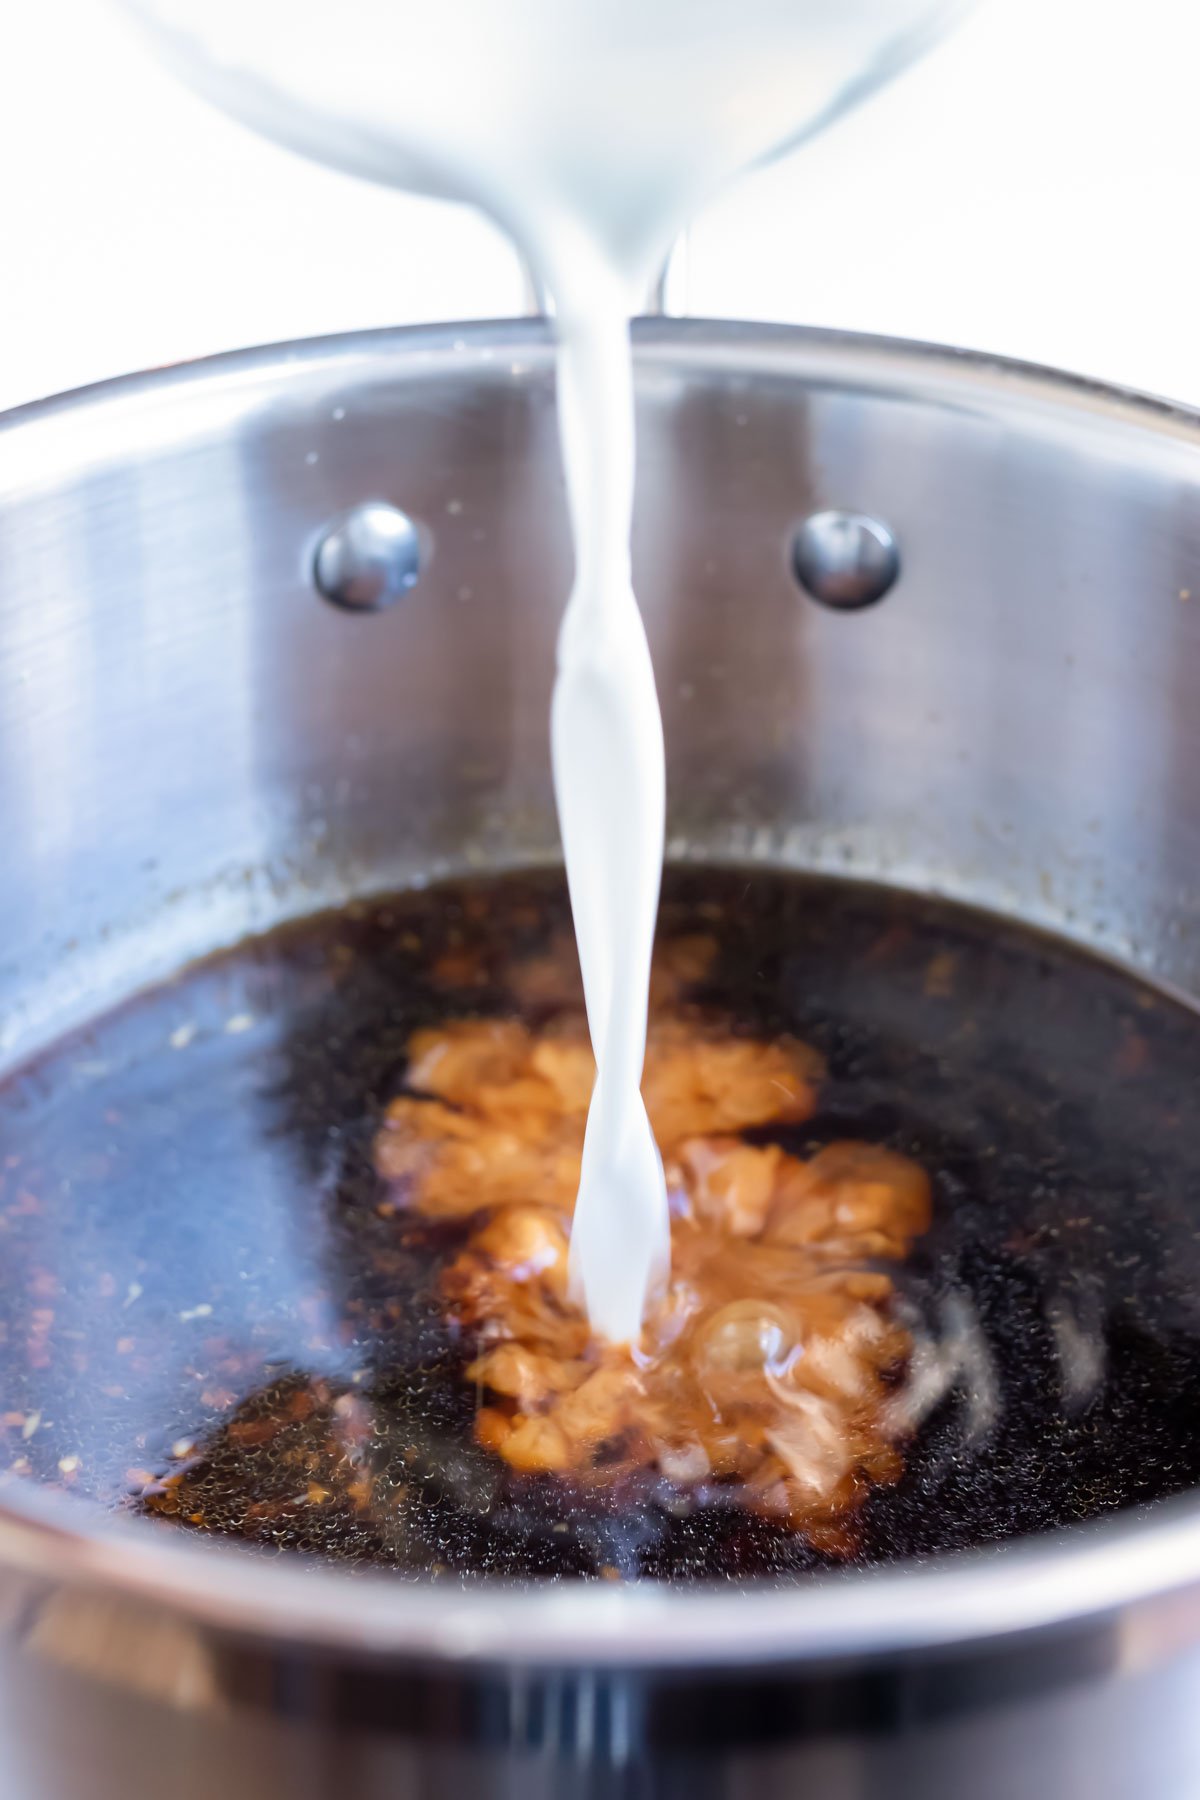 Cornstarch and water mixture is added to this homemade teriyaki sauce.